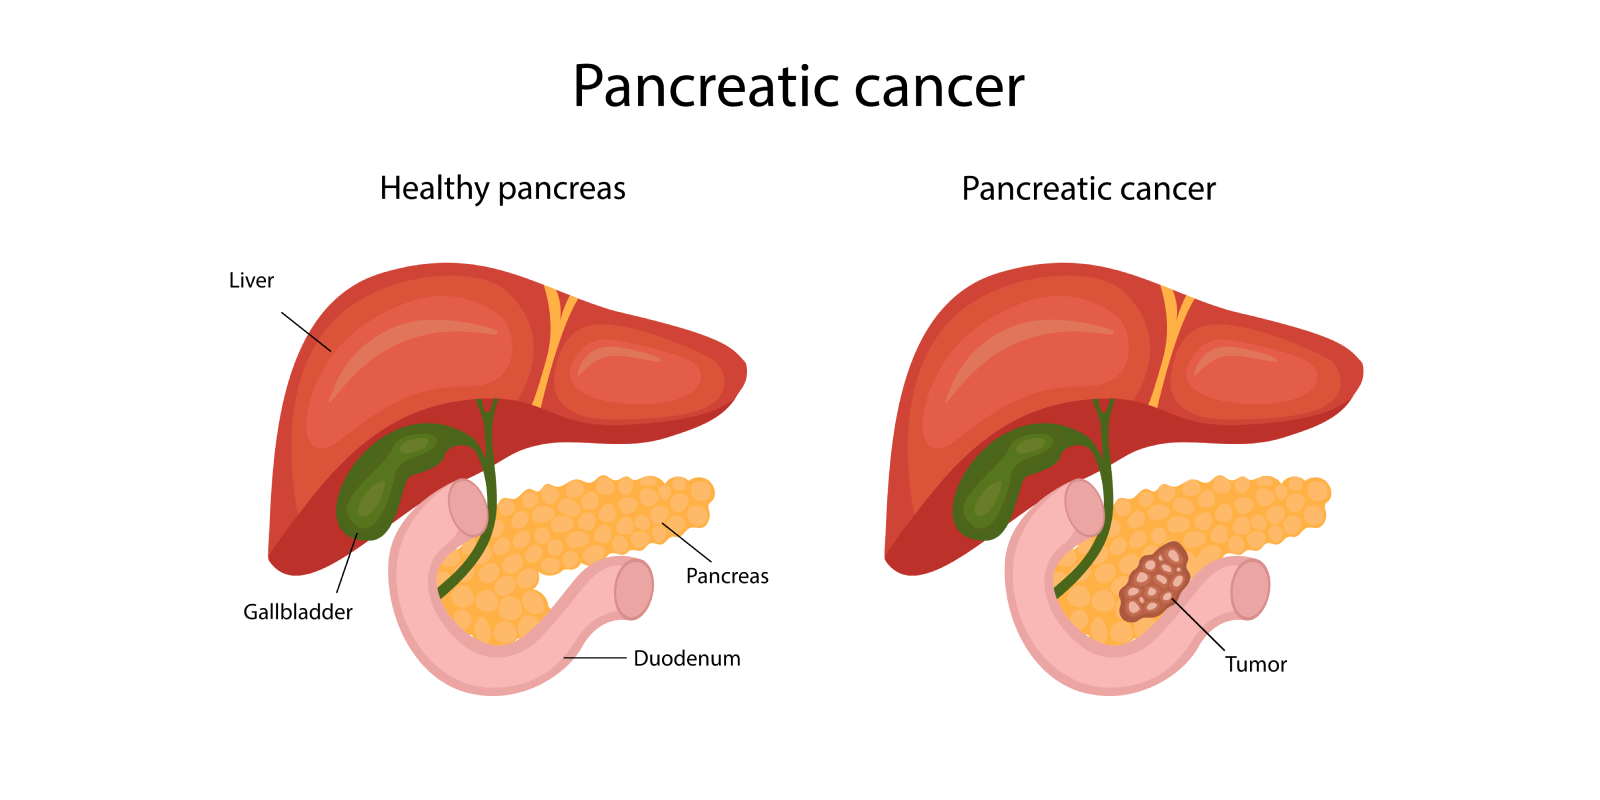 Pancreatic cancer: What Is It, Symptoms, Causes & Treatment
